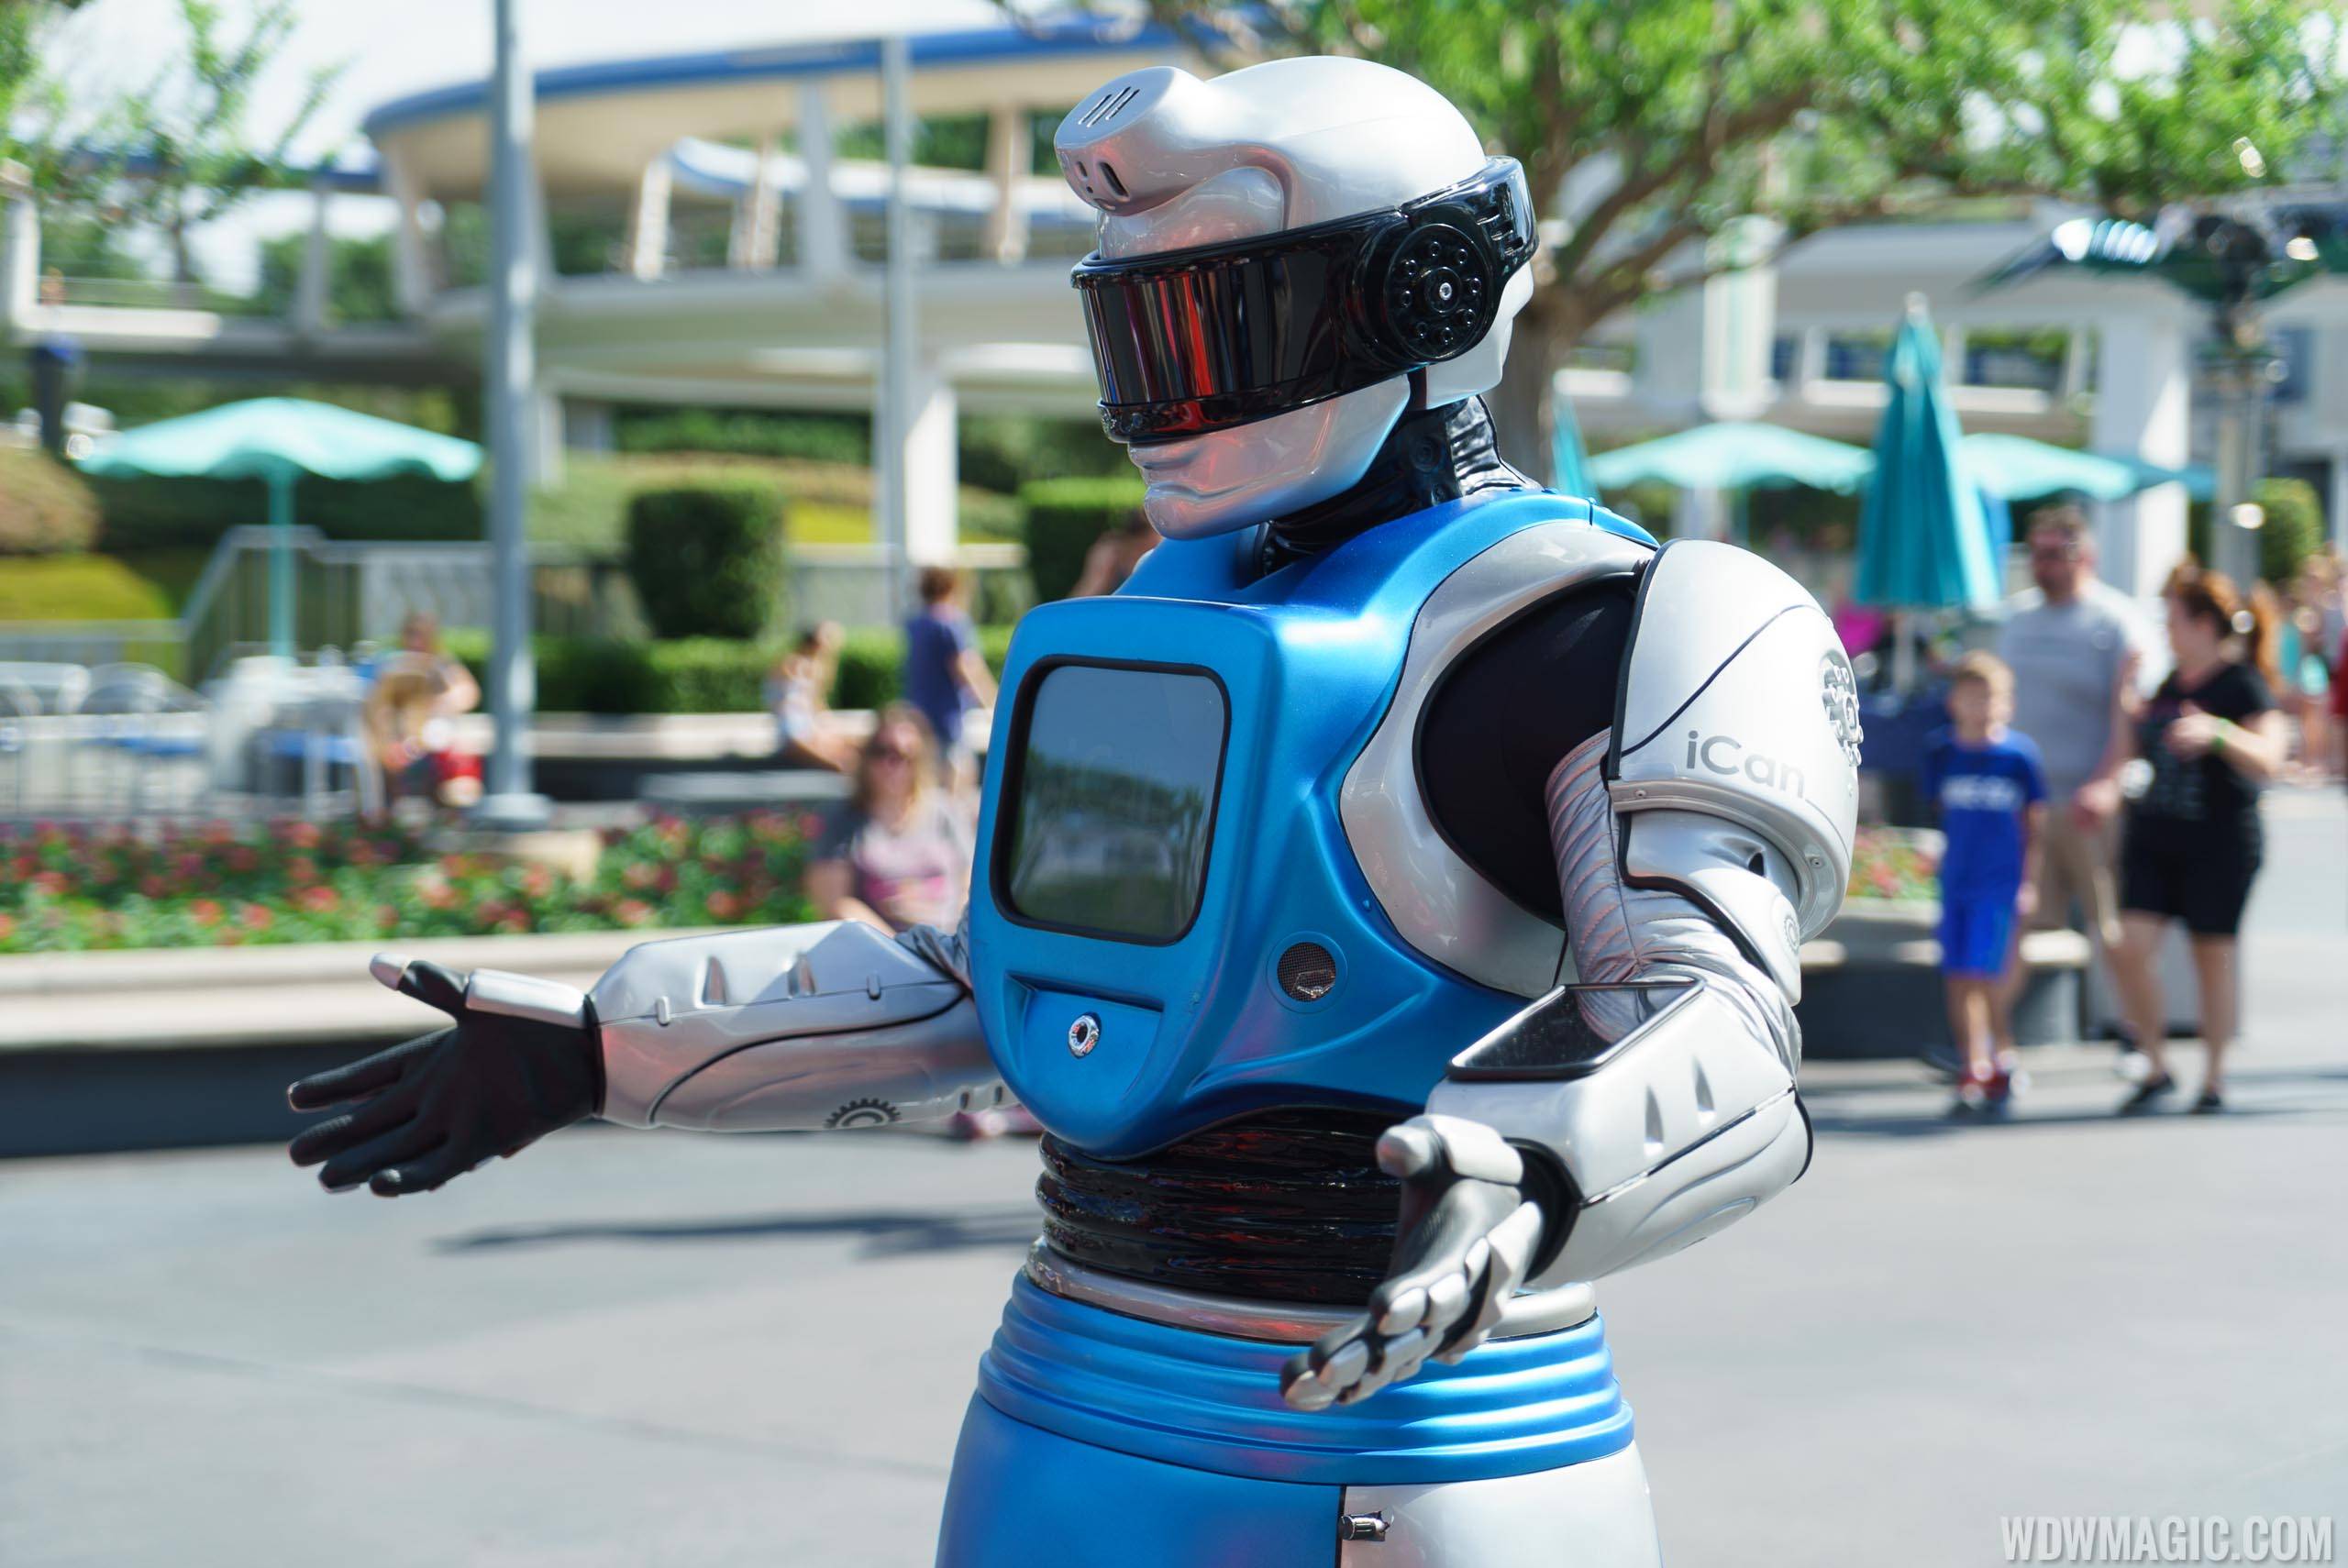 VIDEO - New interactive iCan Robot experience in the Magic Kingdom's Tomorrowland